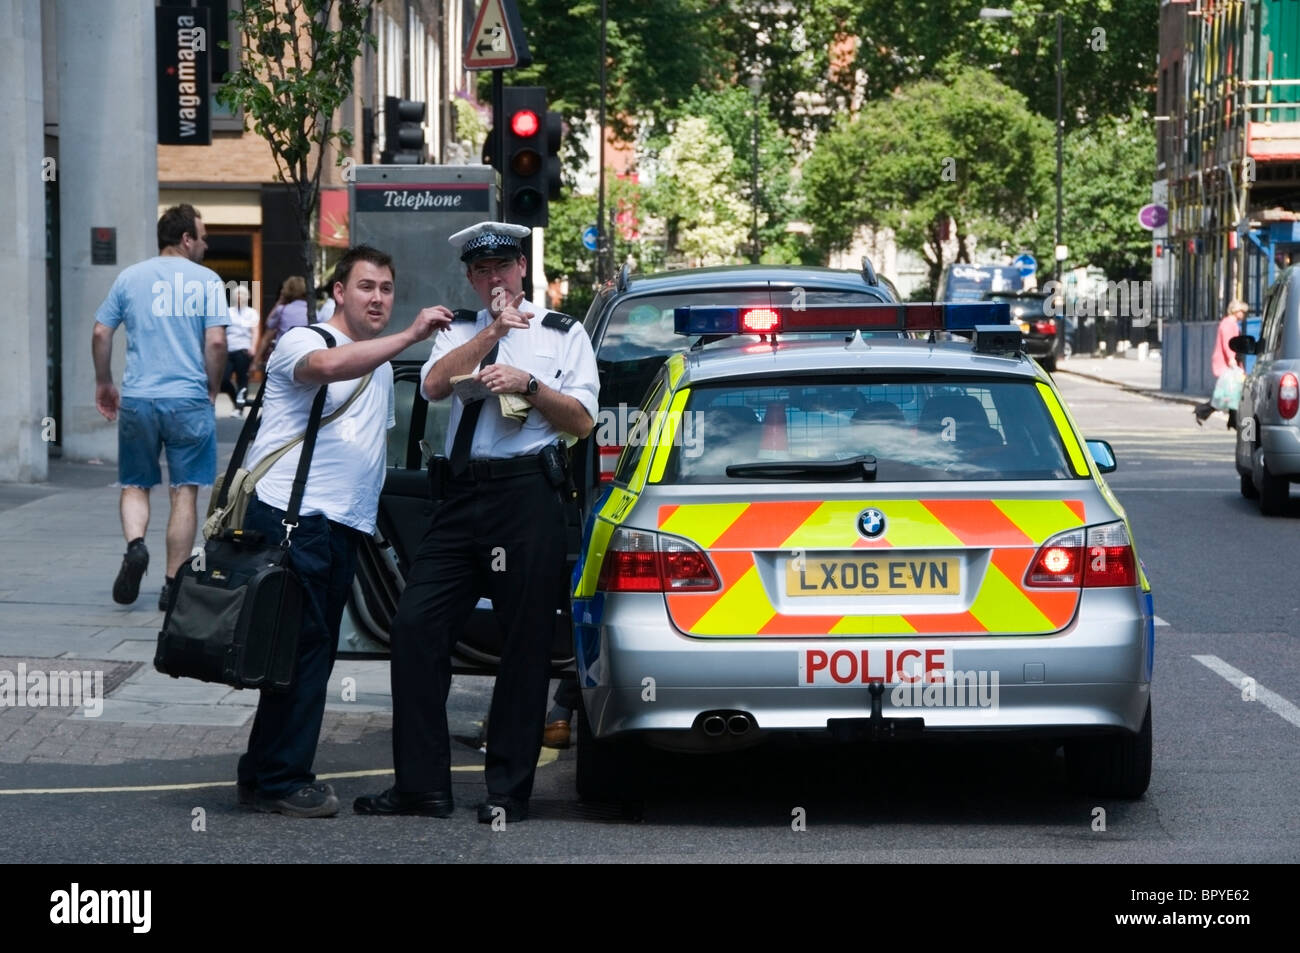 Metropolitan Police helping tourist, with his hand pointing direction on a street, West End, London, England, UK, Europe, EU Stock Photo